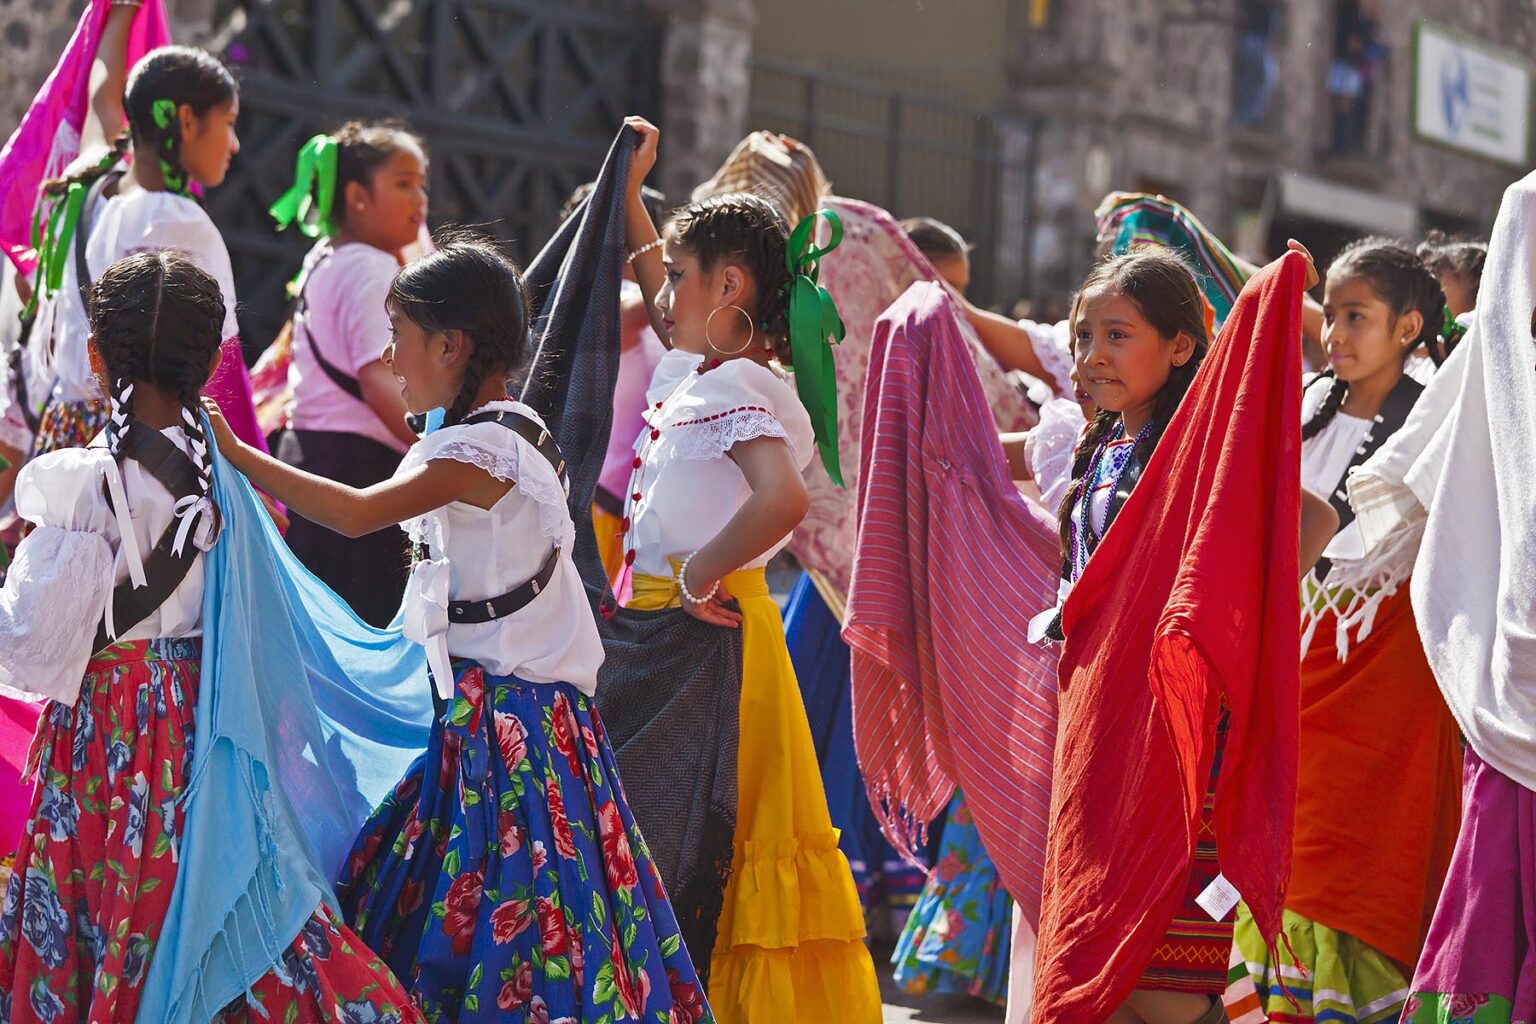 DAY OF THE REVOLUTION is celebrated with a parade on November 20th each year - SAN MIGUEL DE ALLENDE, MEXICO